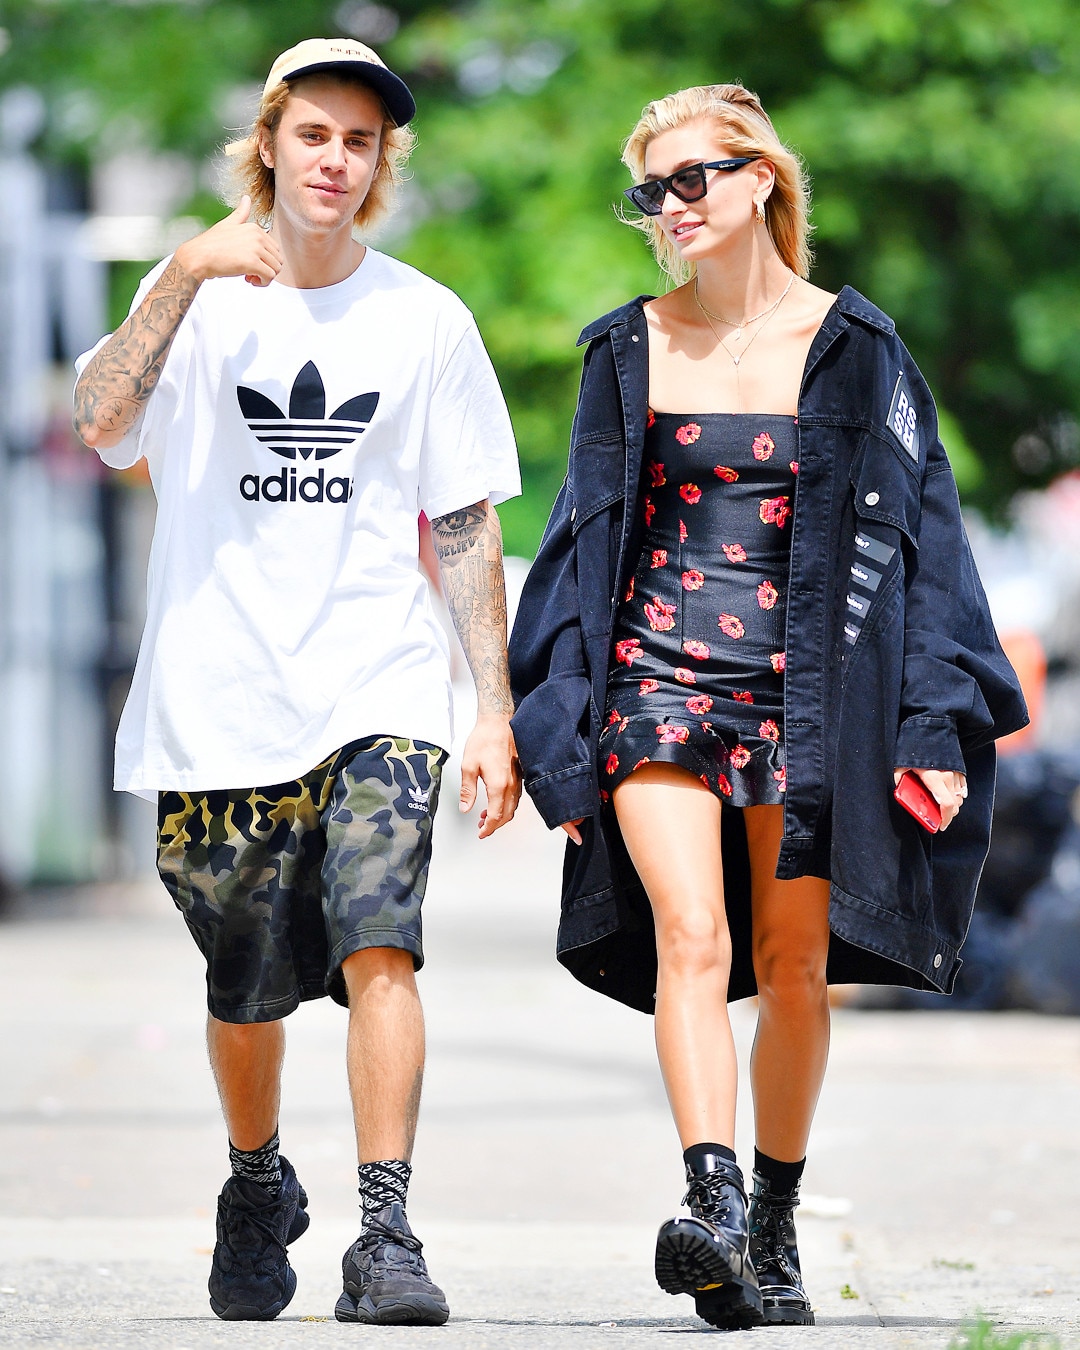 Hailey Bieber & Justin Bieber: How Their Style Has Evolve Together